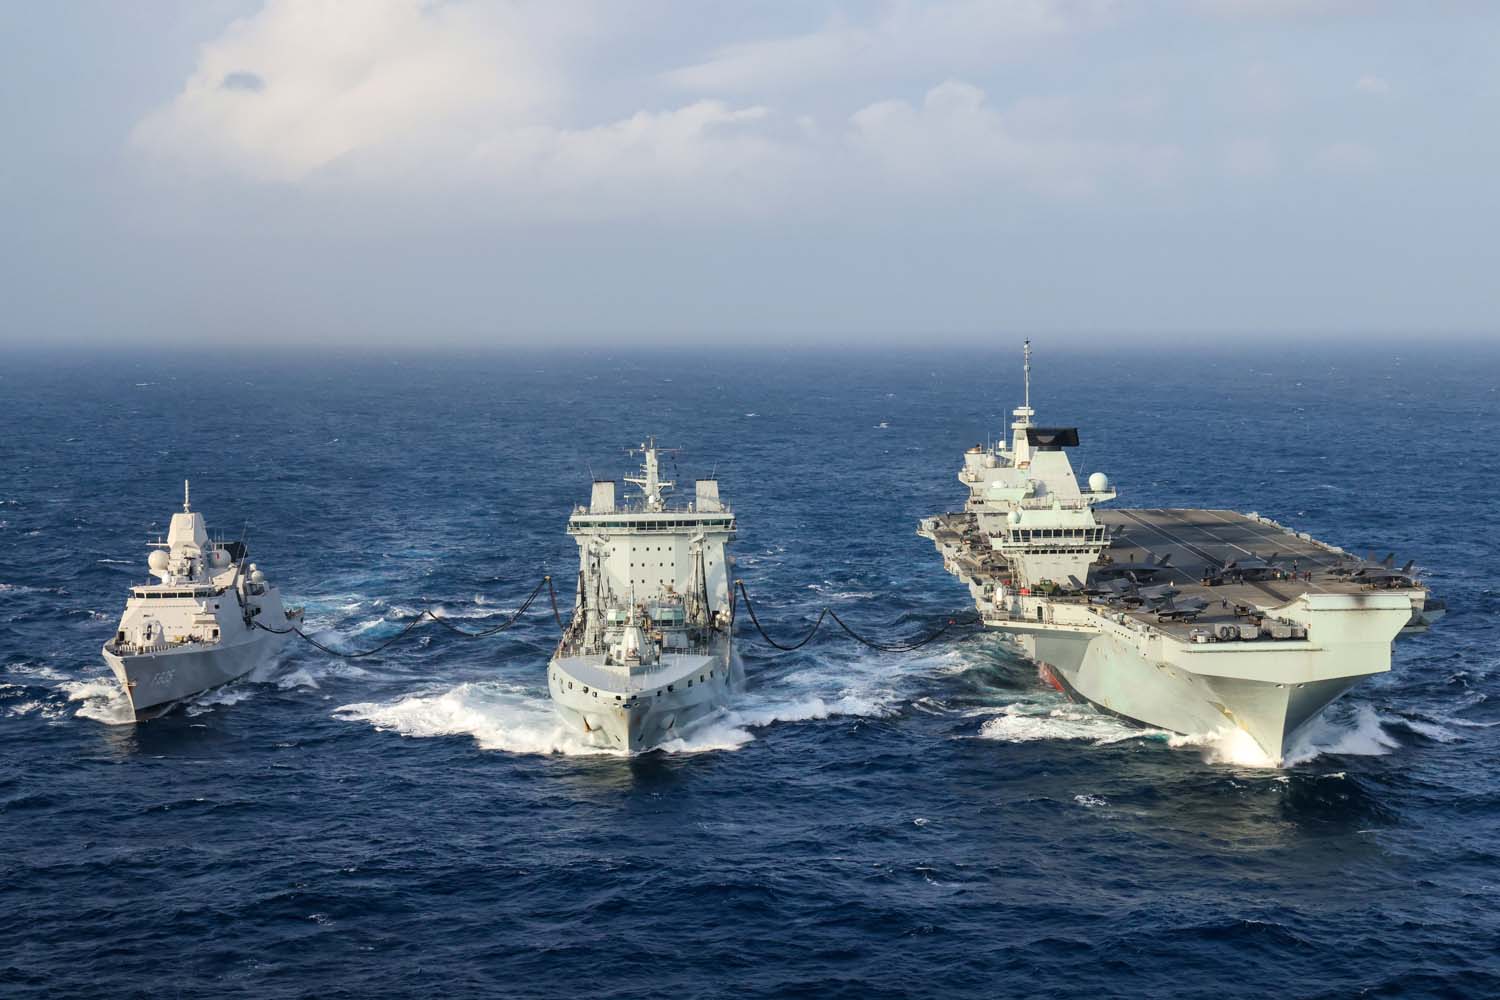 HNLMS Evertsen, RFA Tidespring and HMS Queen Elizabeth to conduct a double replenishment at sea.